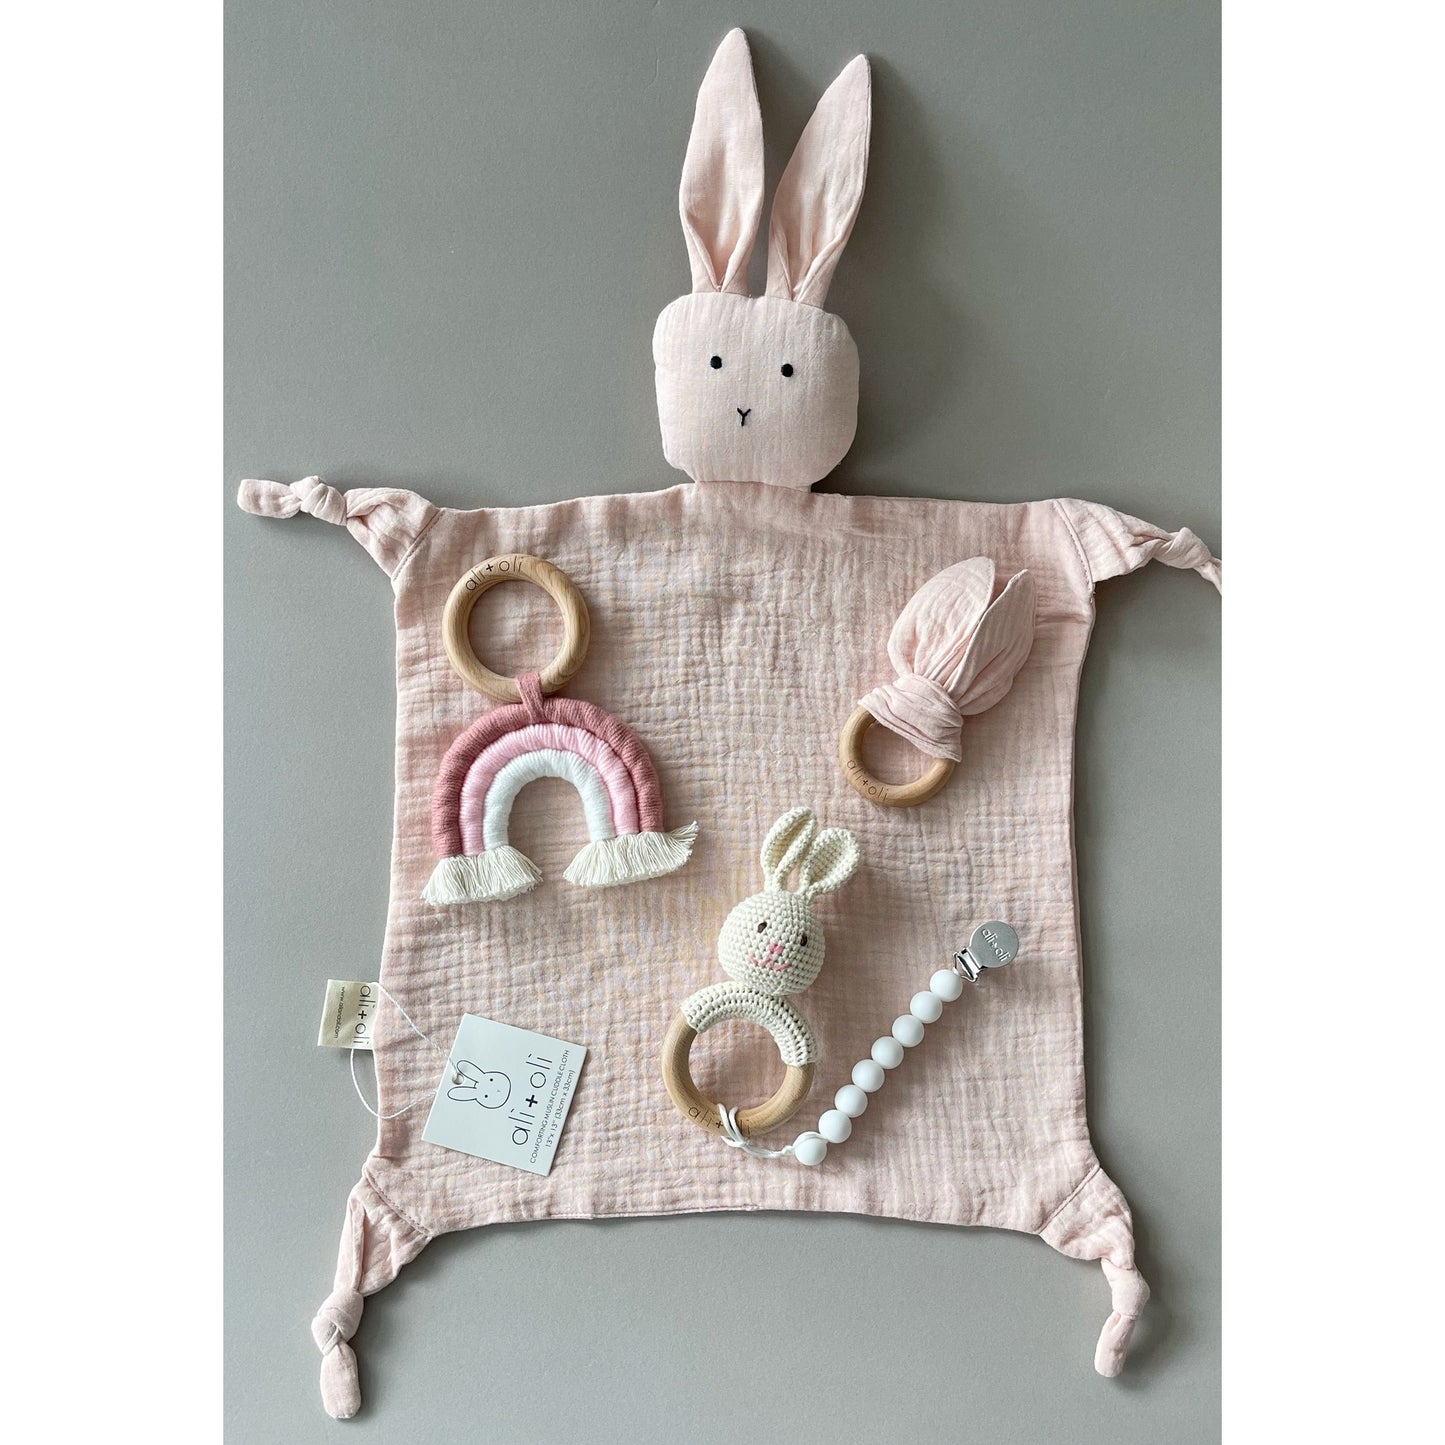 Cuddle Security Blanket Soft Muslin Cotton: Pink Bunny